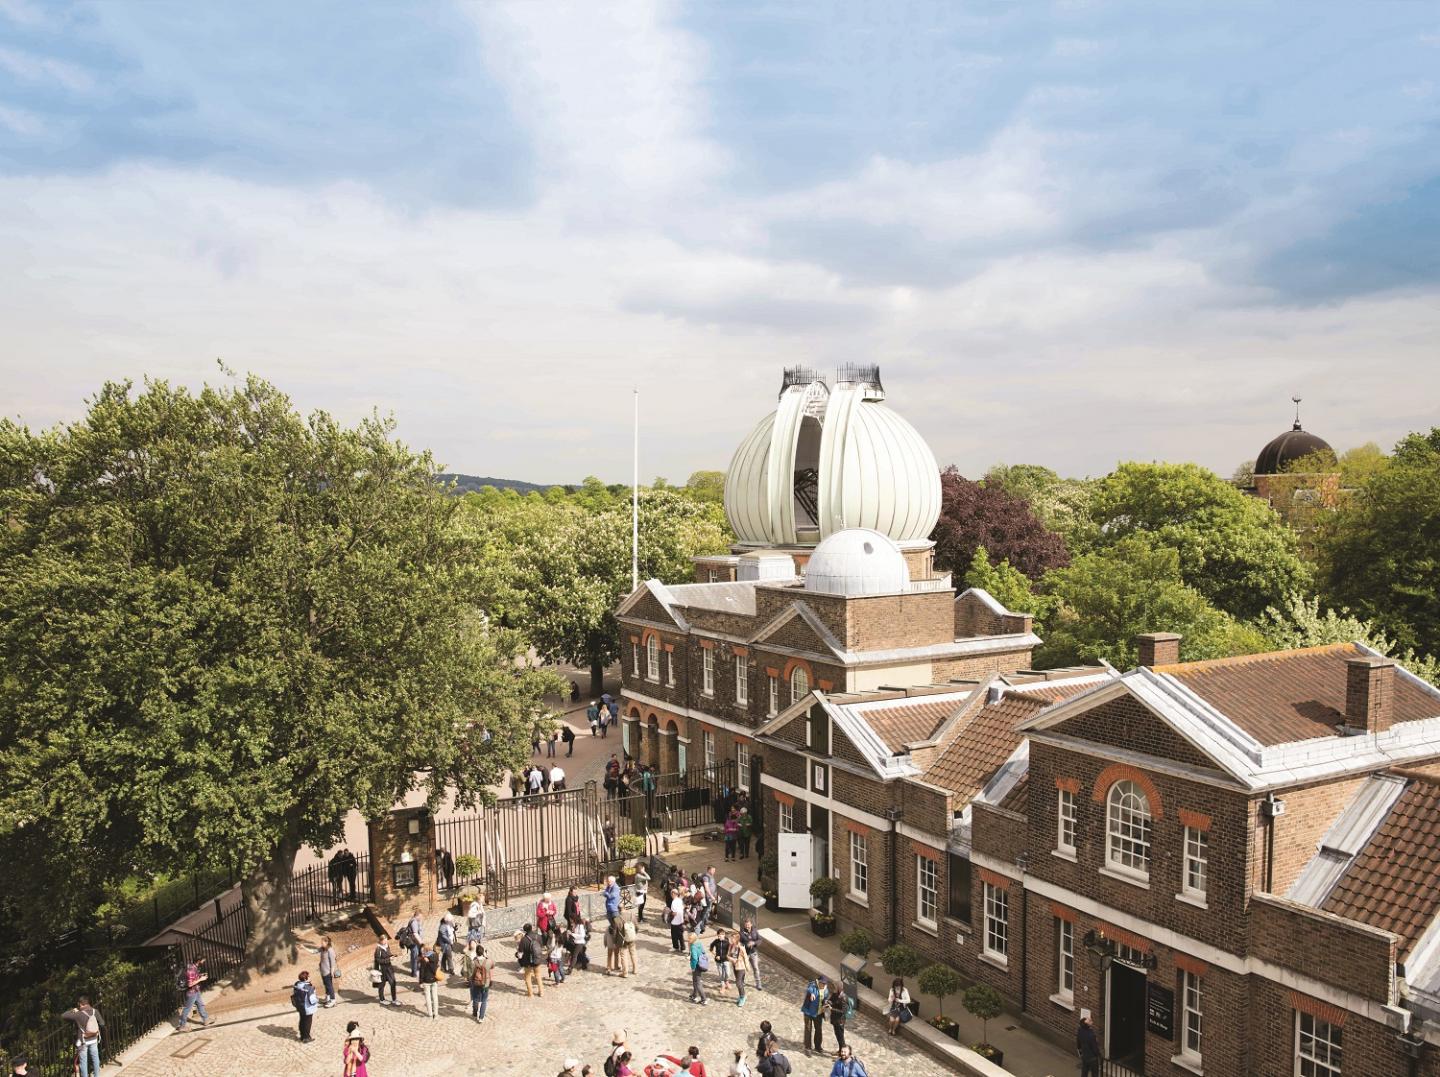 The Royal Observatory at Greenwich